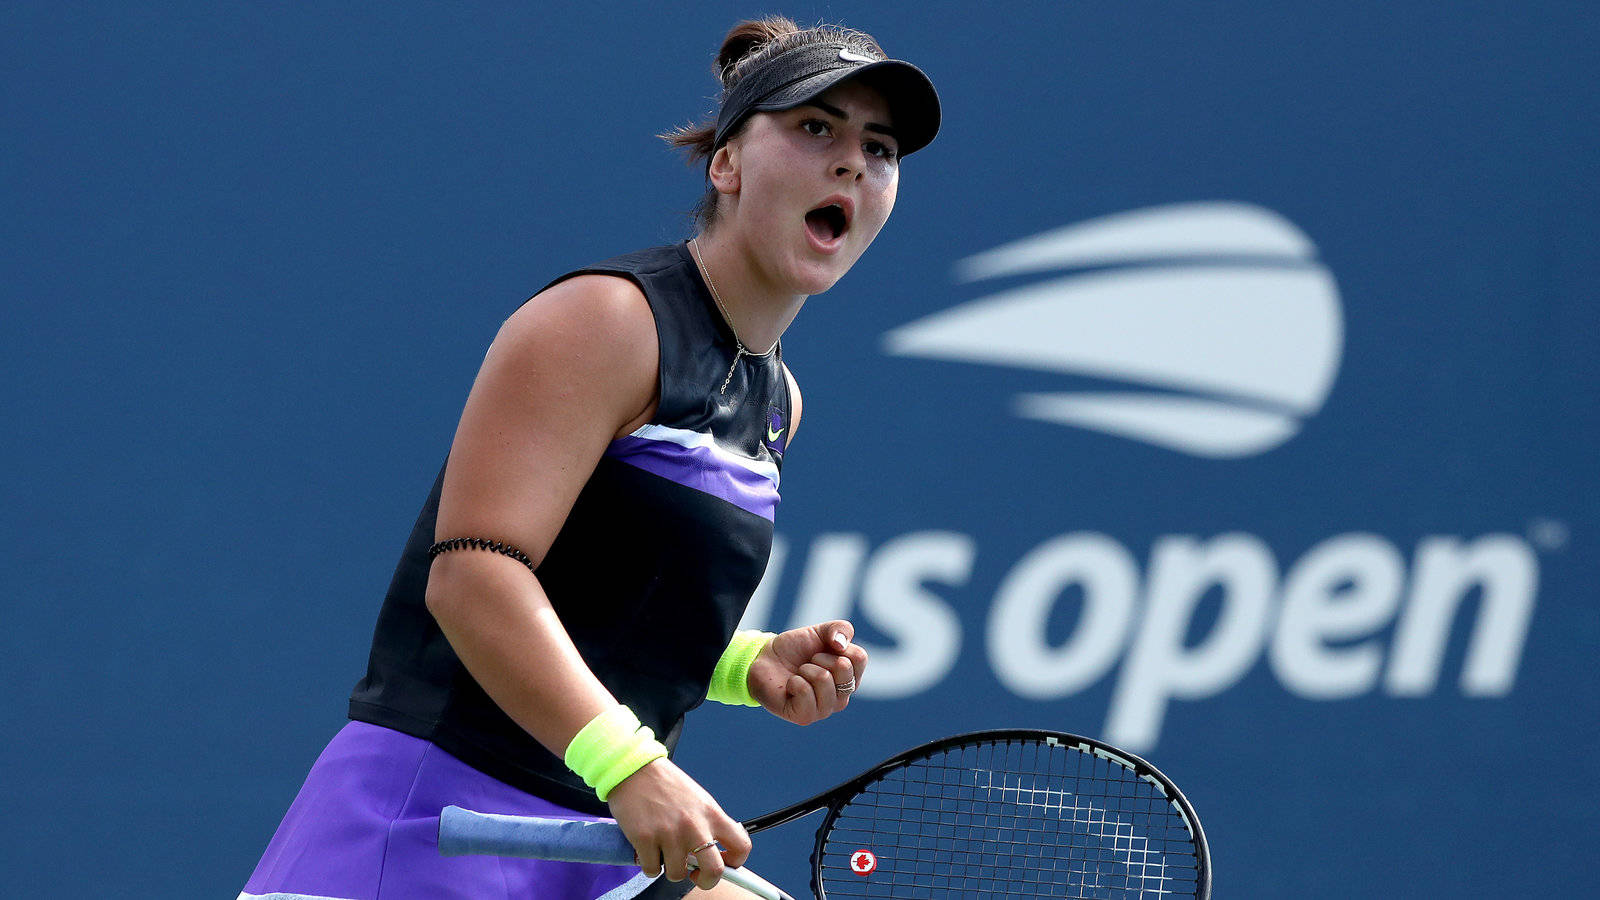 Professional tennis player Bianca Andreescu celebrating a victory at the US Open. Wallpaper